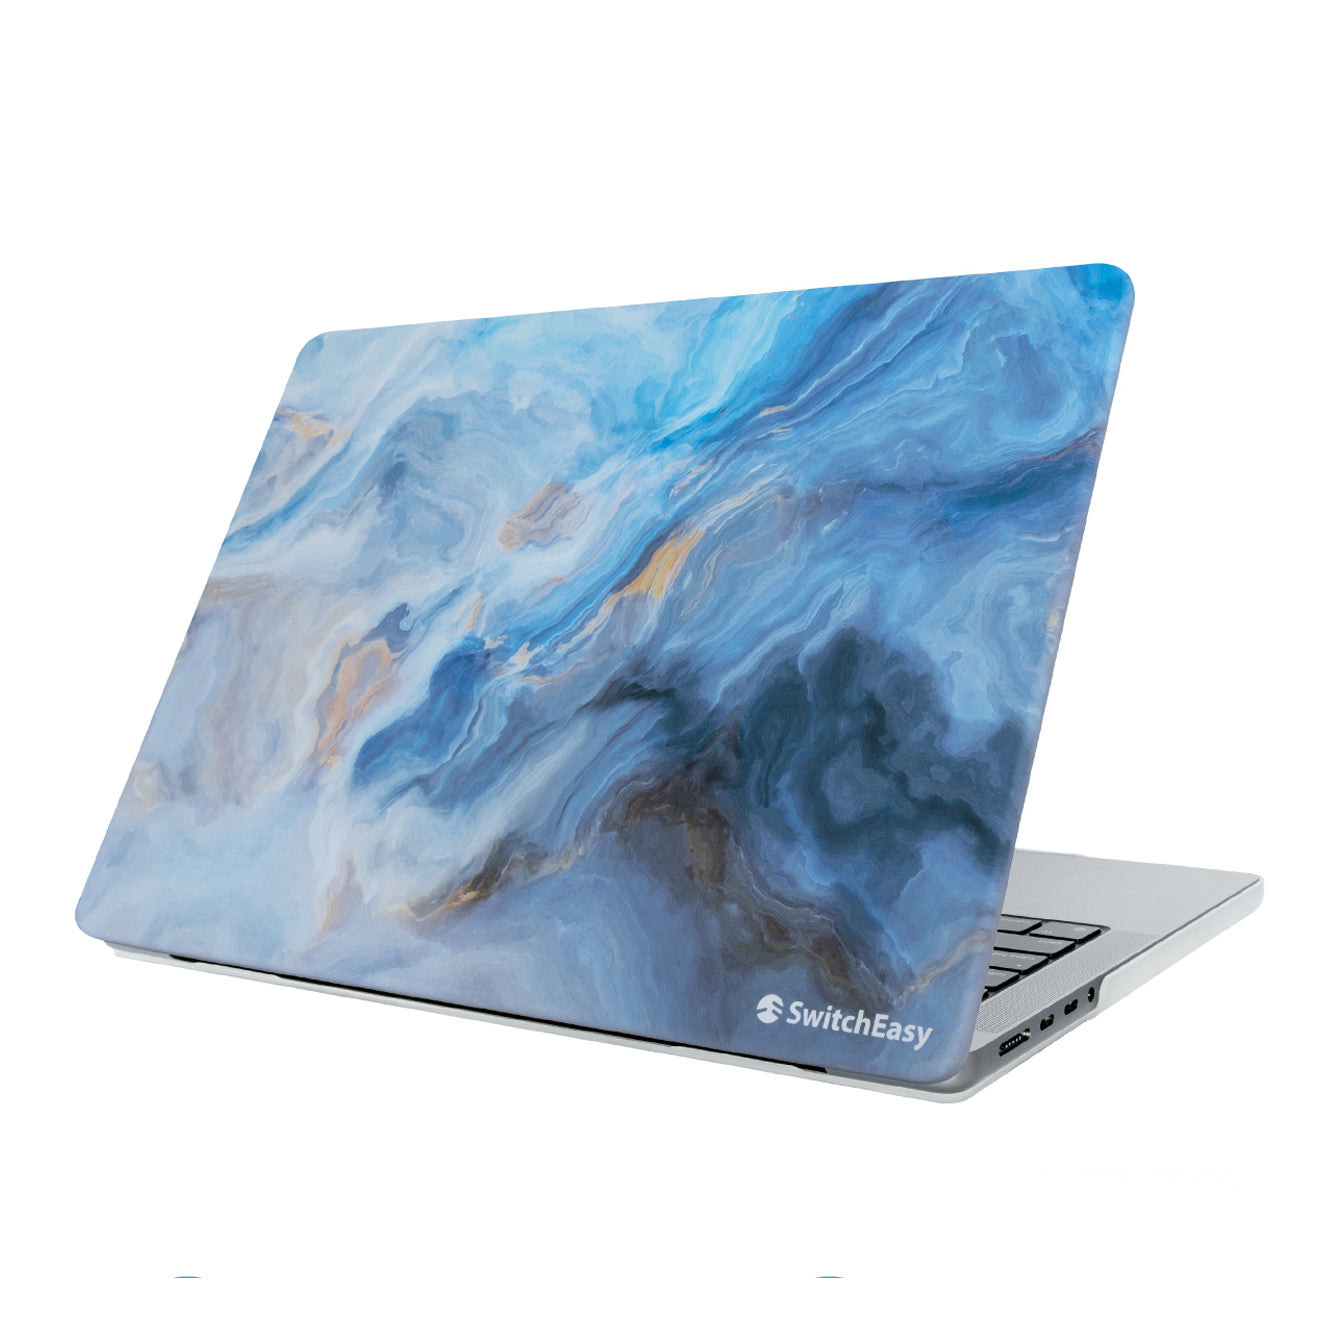 SwitchEasy Marble MacBook Protective Case for MacBook Pro 13"(M1/Intel) Default SwitchEasy Marine Blue 